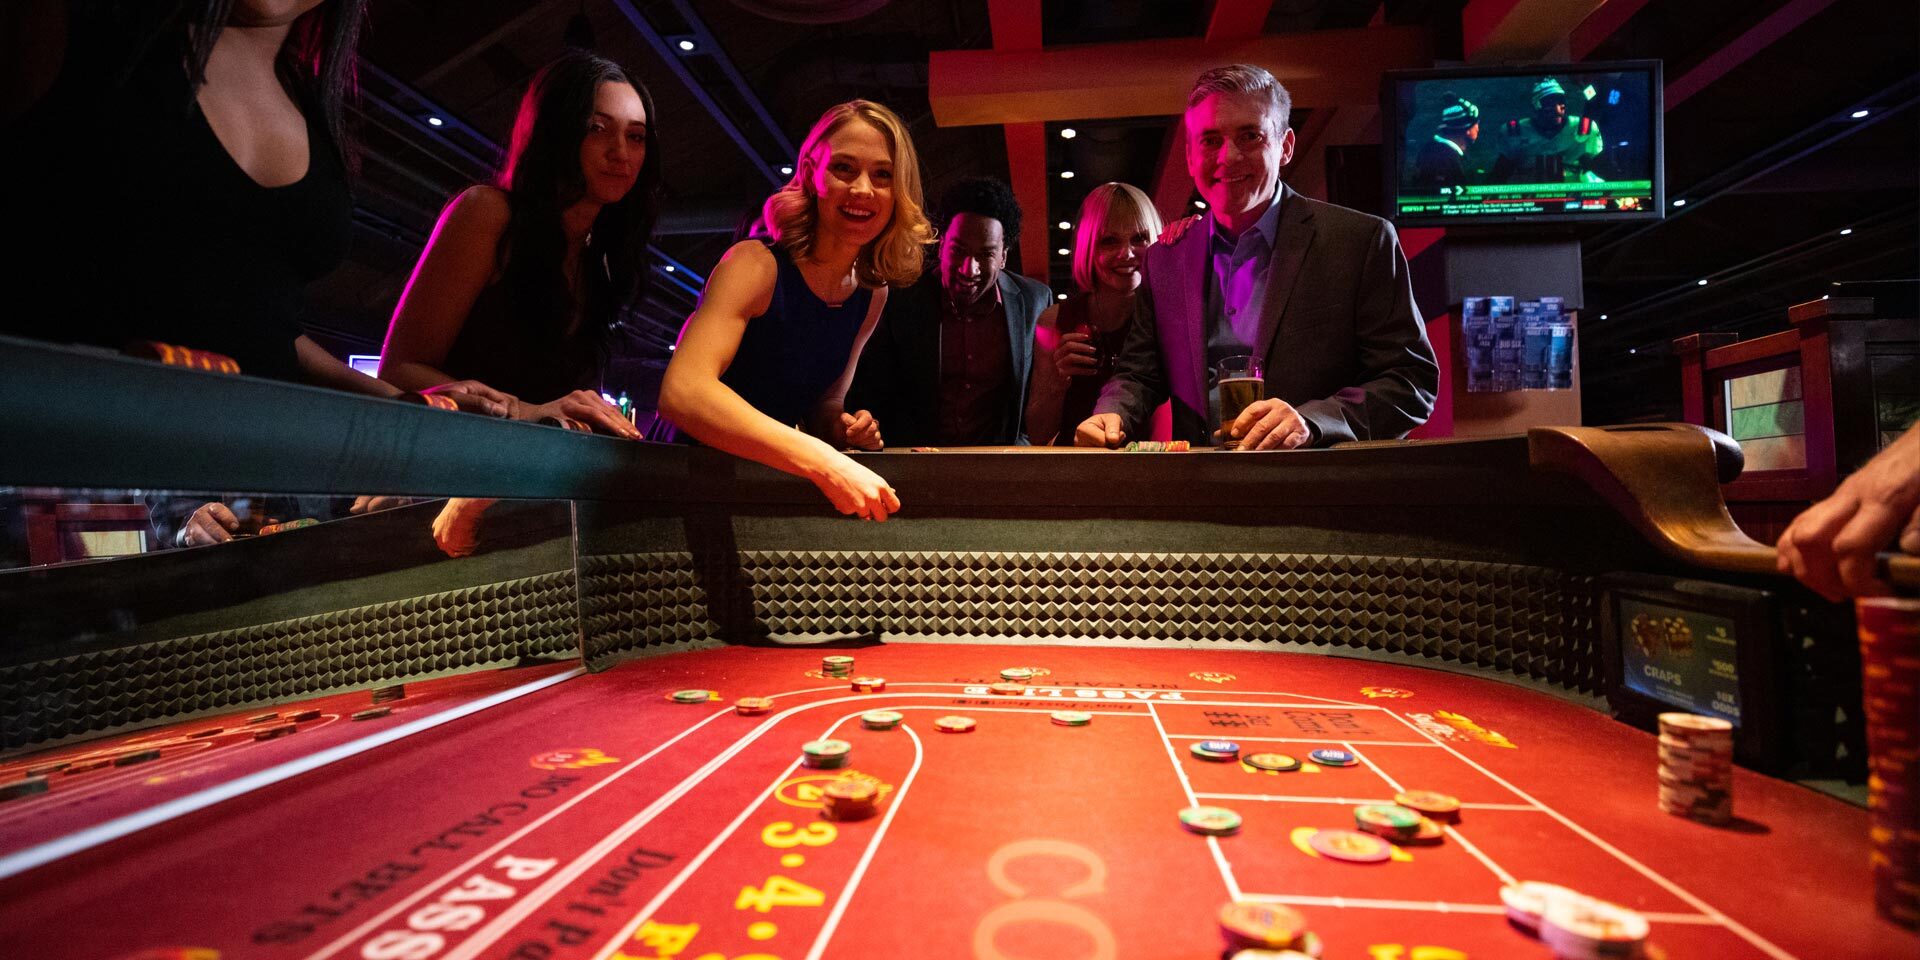 The most outstanding facilities in a reliable casino site will satisfy all customers